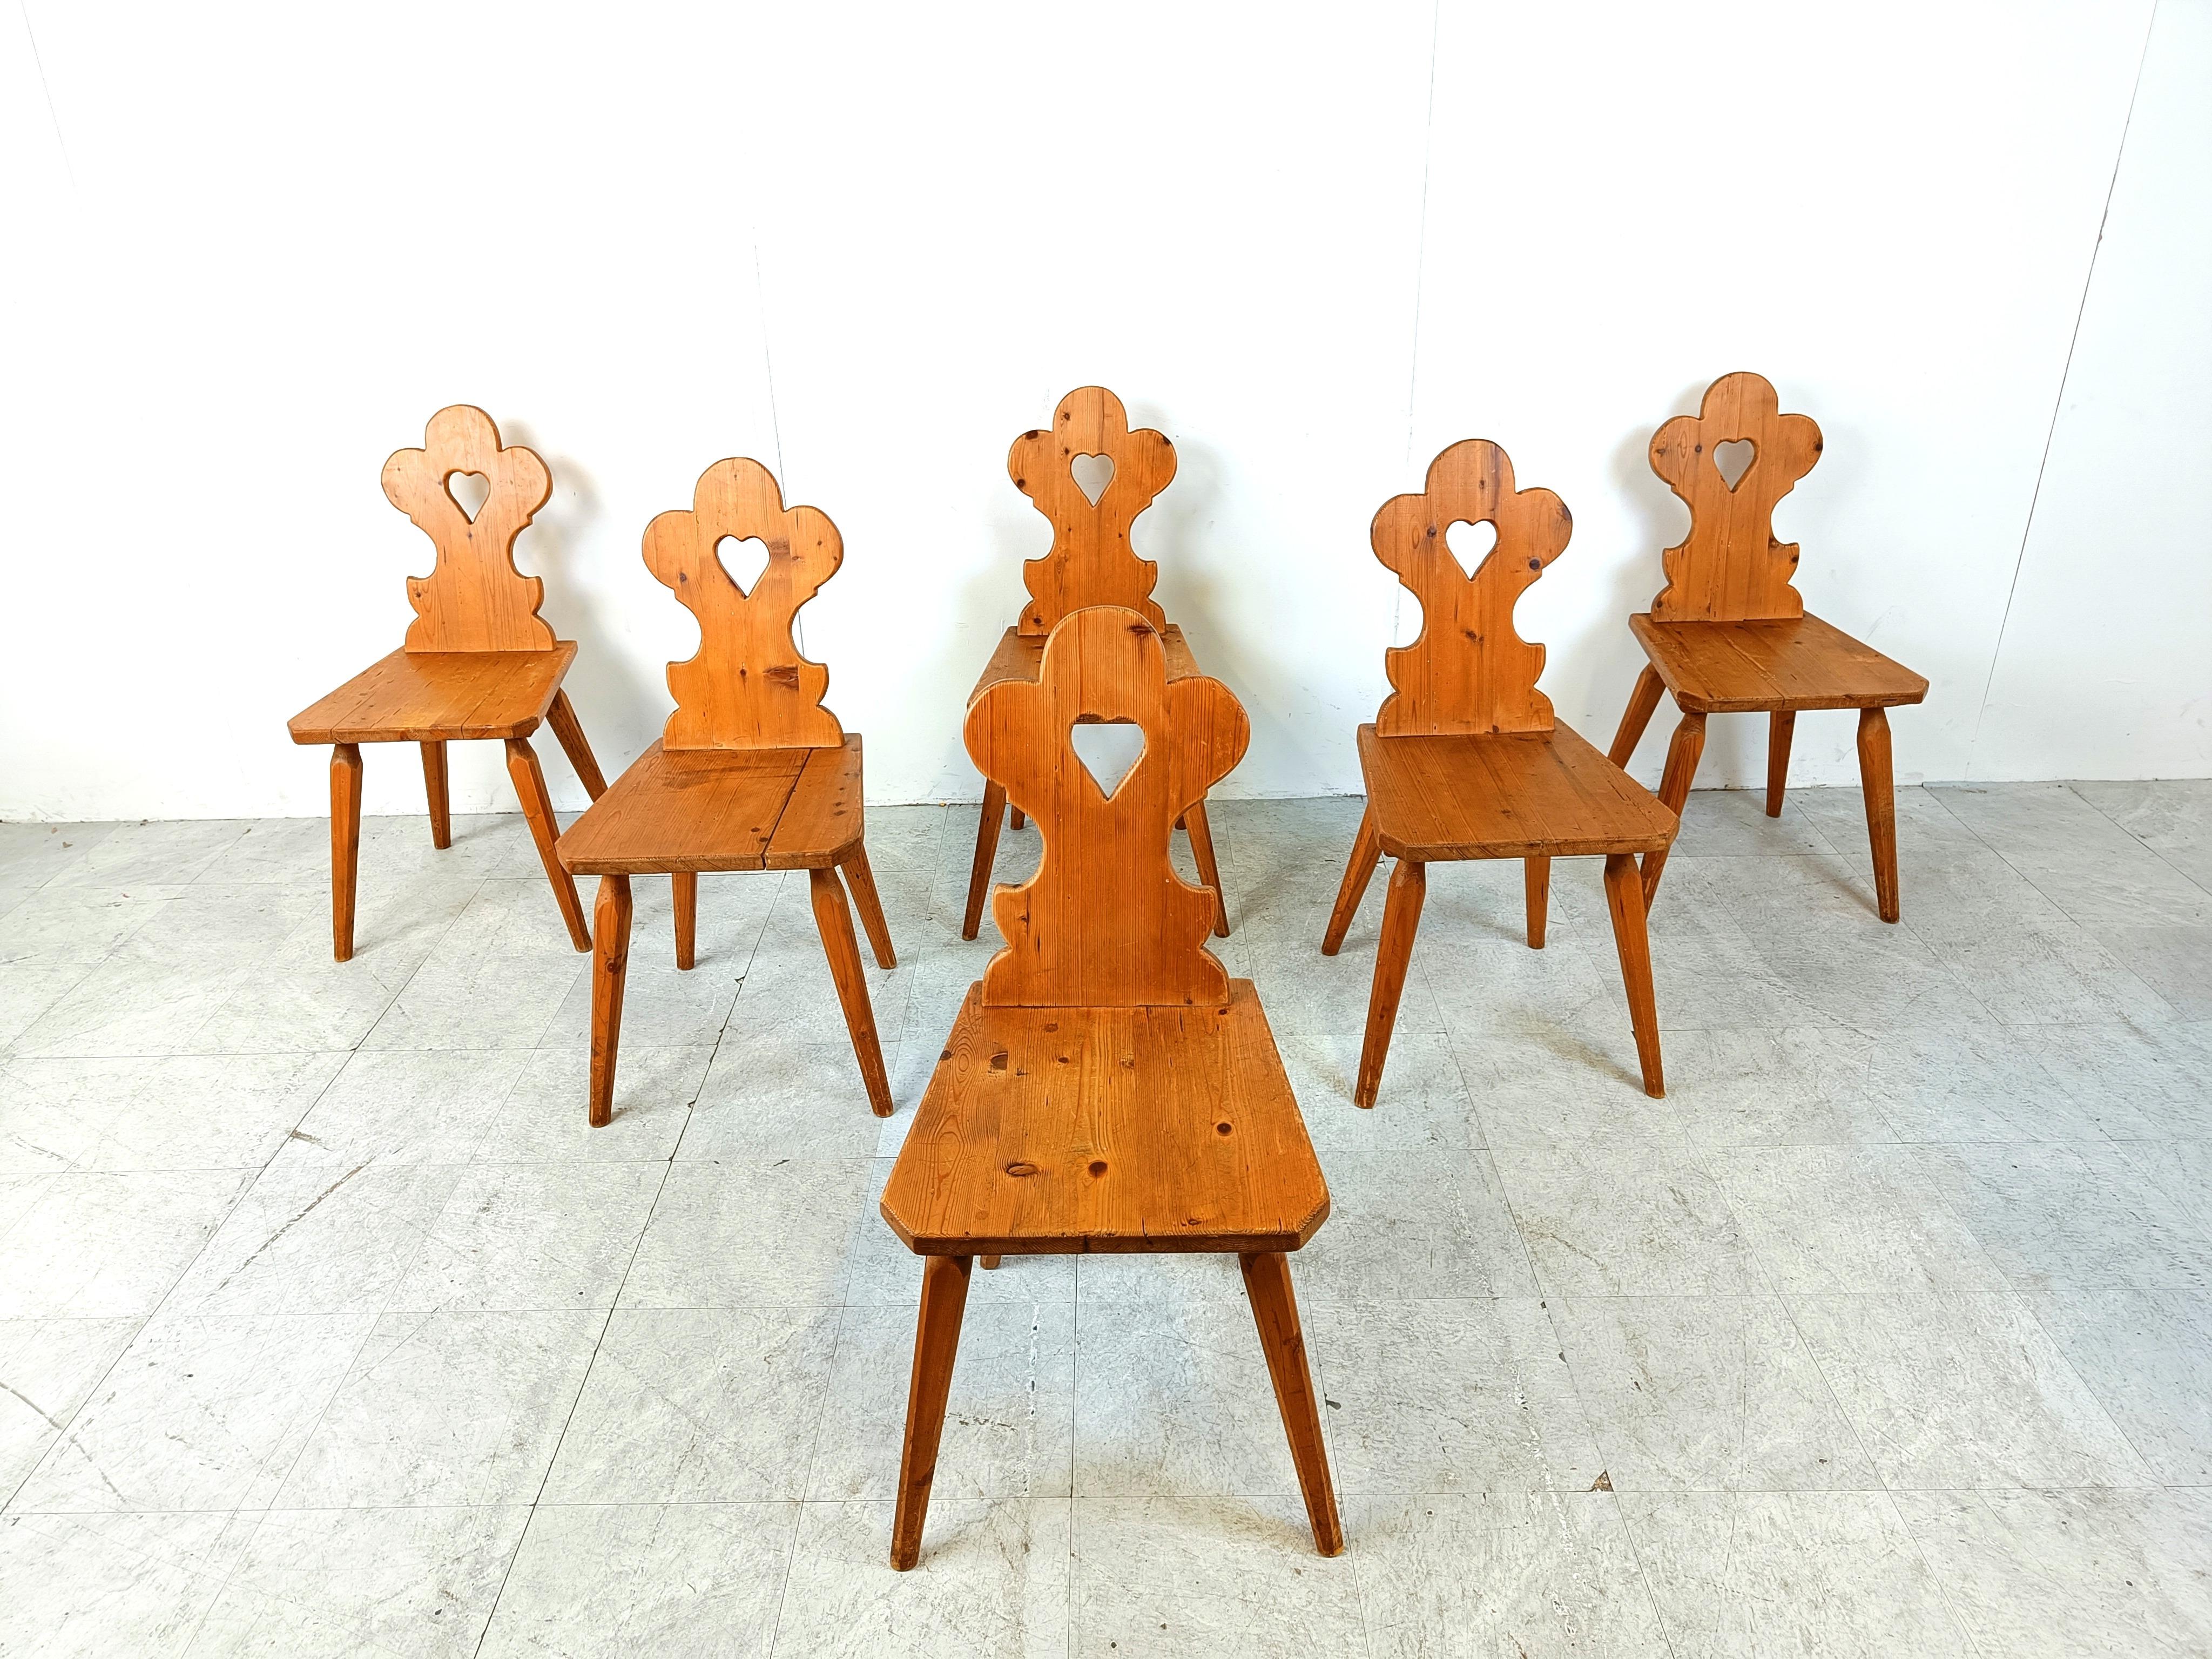 Vintage oak swedish folk art dining chairs

These rustic farm chairs were handcrafted and show good craftsmenship.

Good condition with normal age related wear

1960s - Sweden

Dimensions:
Height: 93cm/36.61